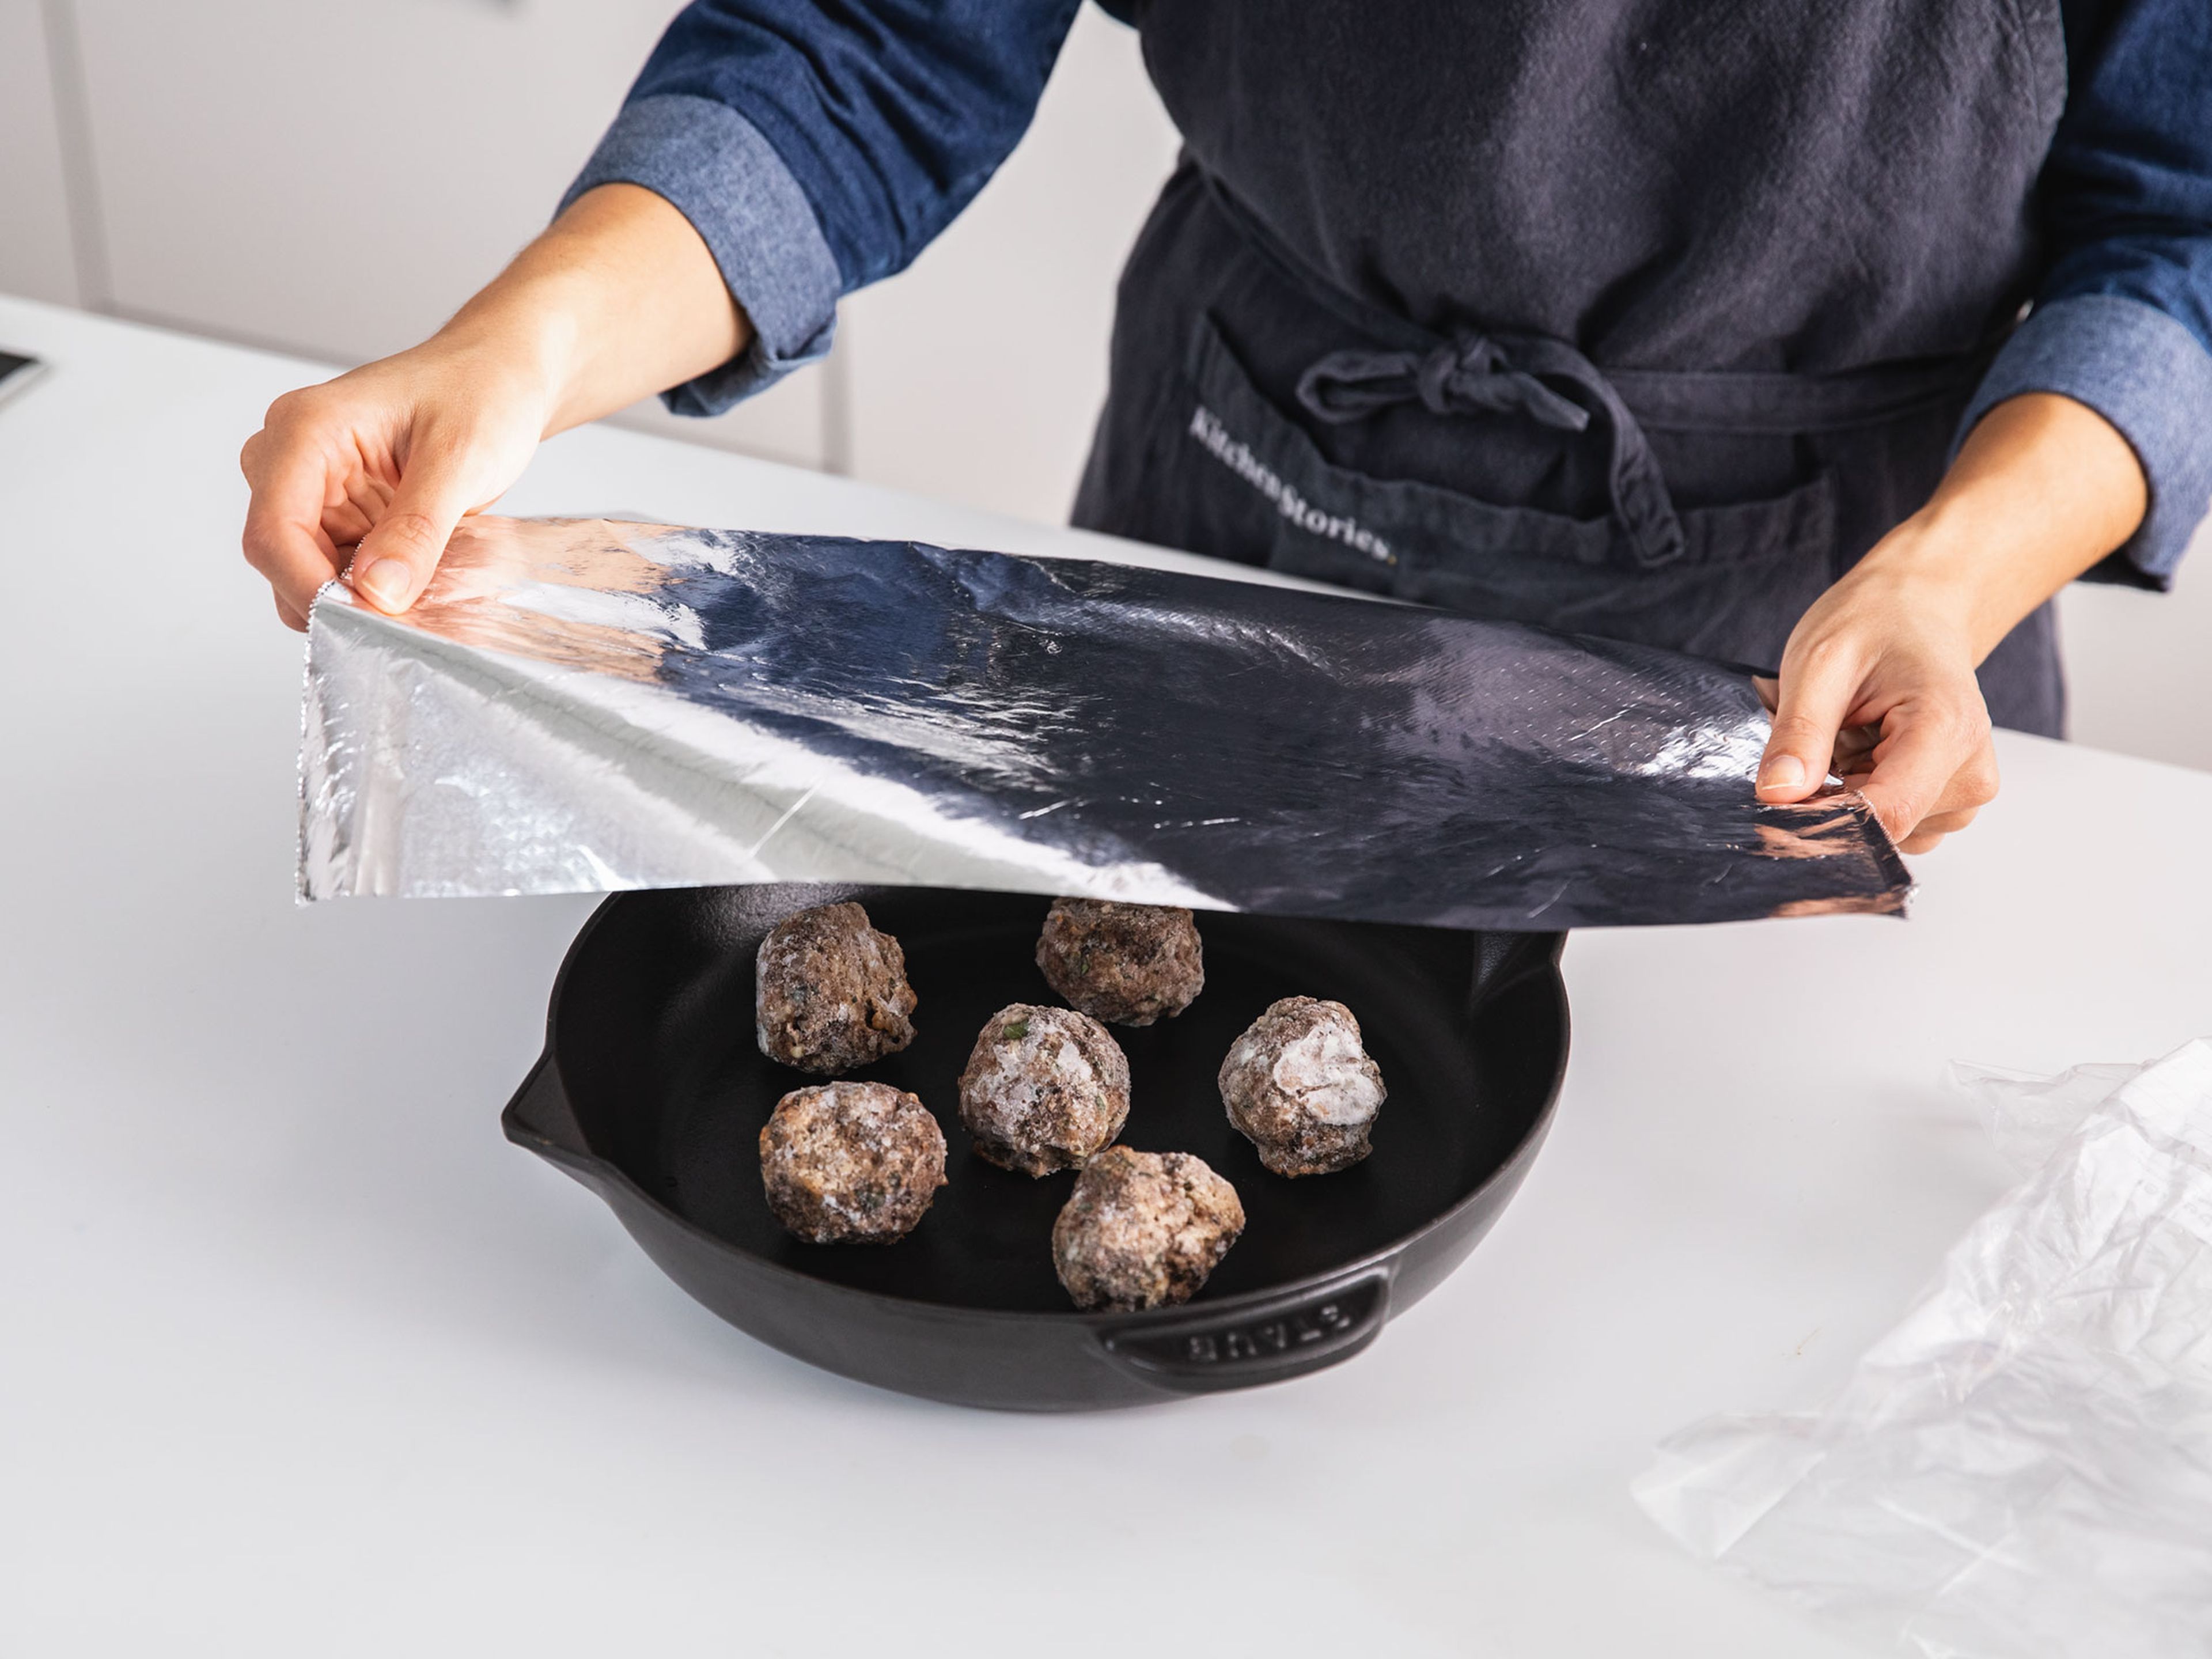 To reheat, place the frozen meatballs in an ovenproof pan or baking dish and cover with foil. Bake at 150°C/300°F for approx. 30 minutes, or until hot all the way through.